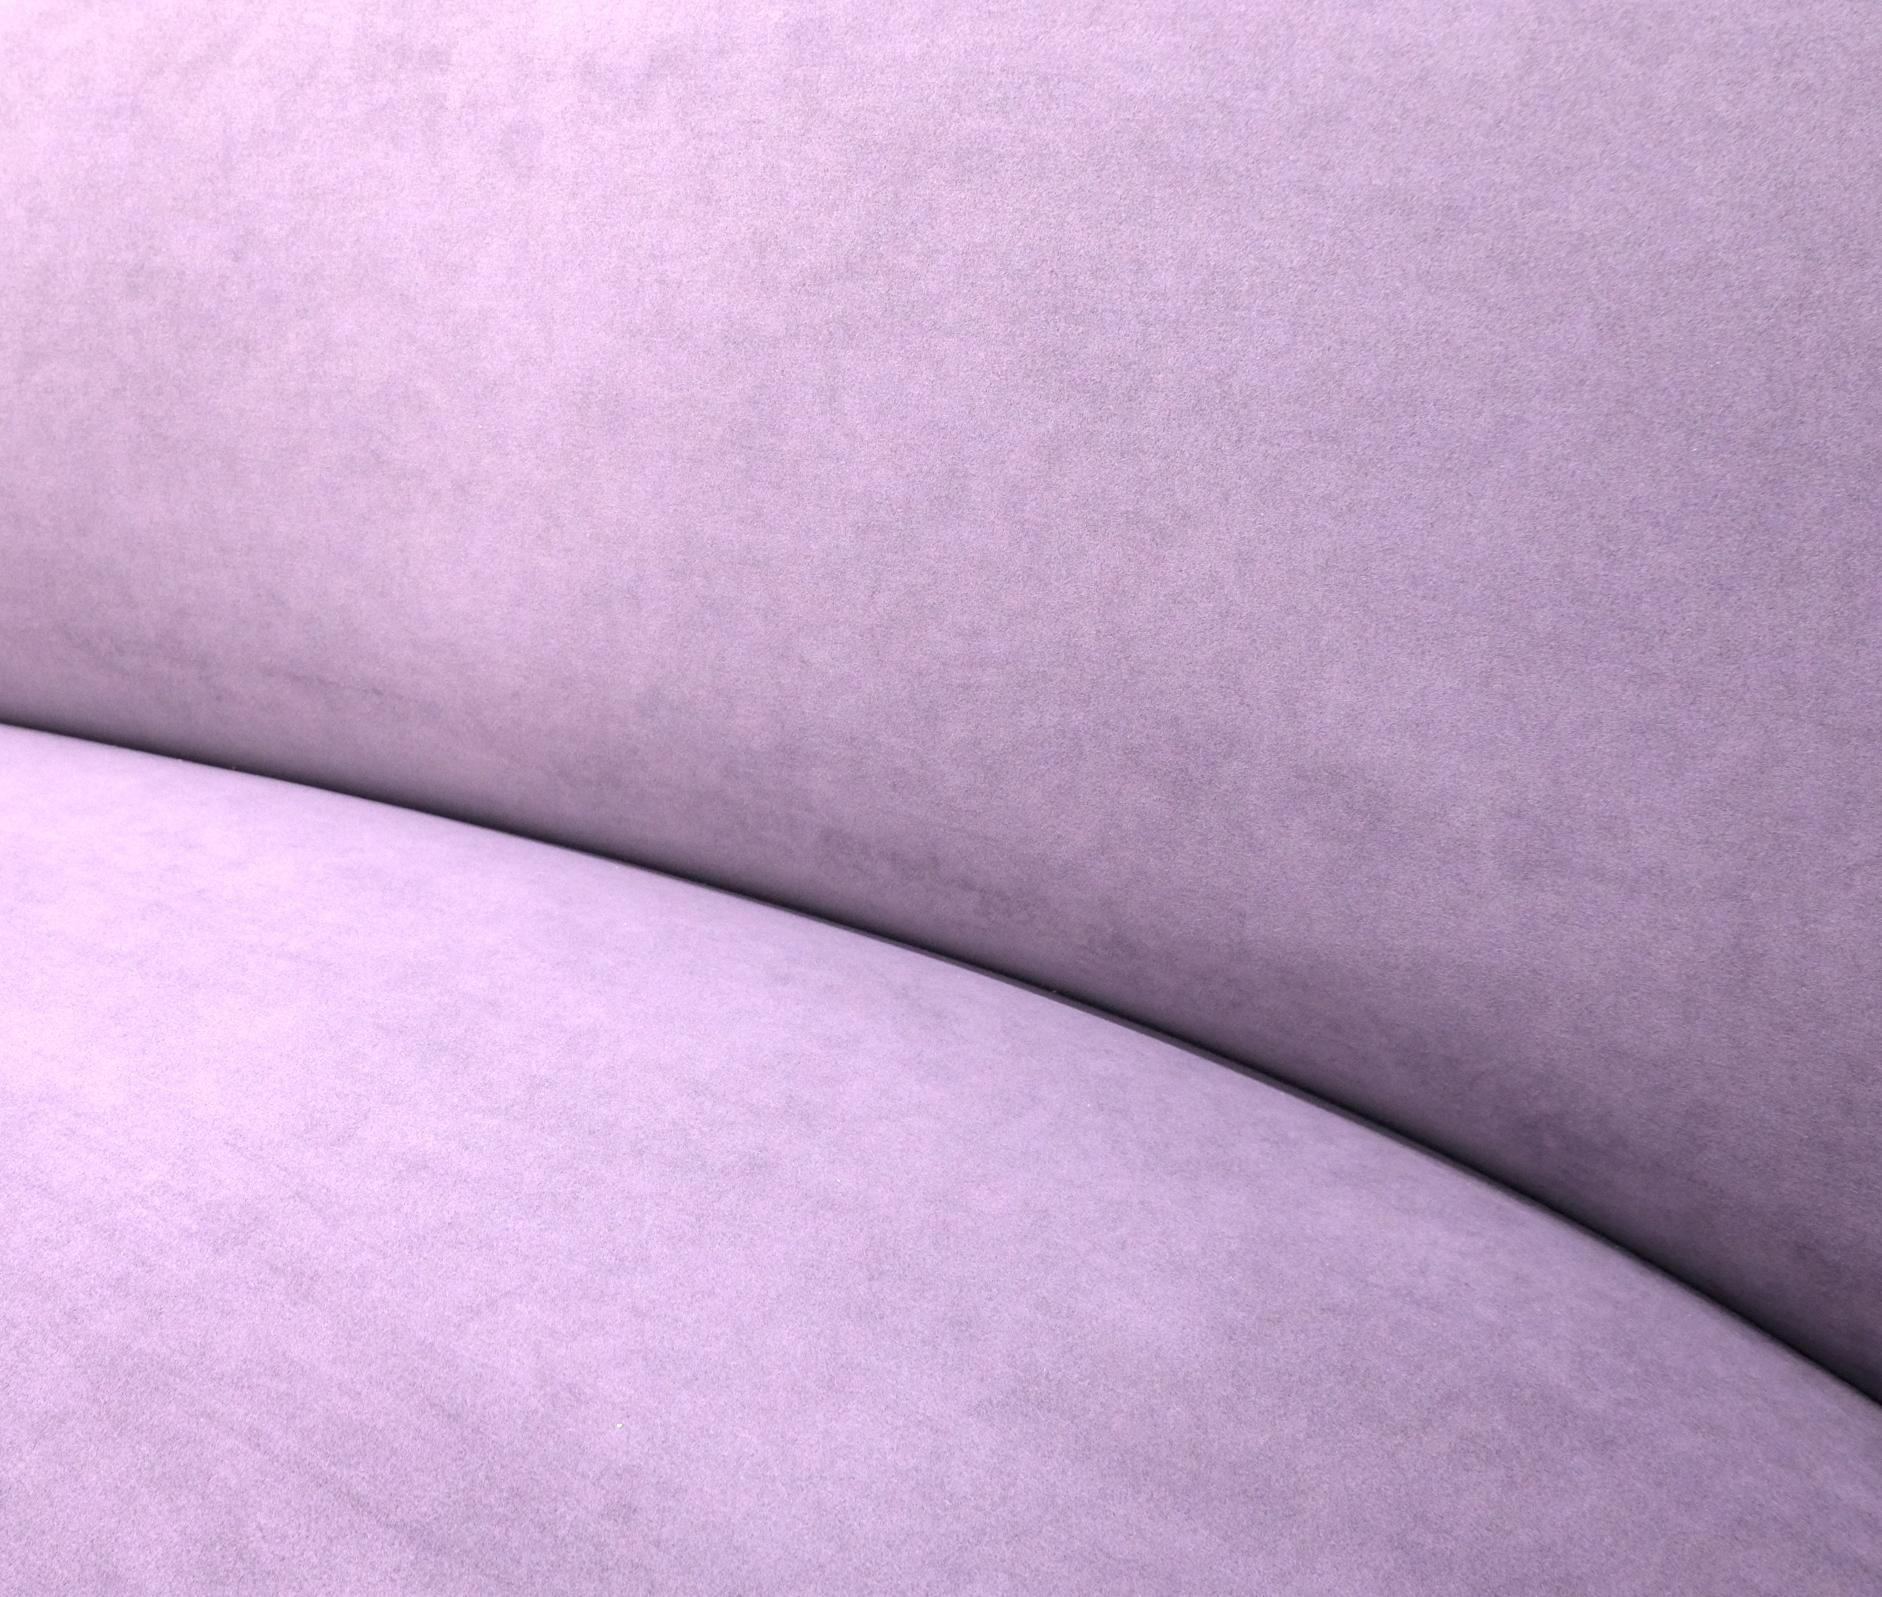 Lavender Ultra Suede Cloud Sofa Chaise Lounge by Weiman  In Good Condition For Sale In Rockaway, NJ